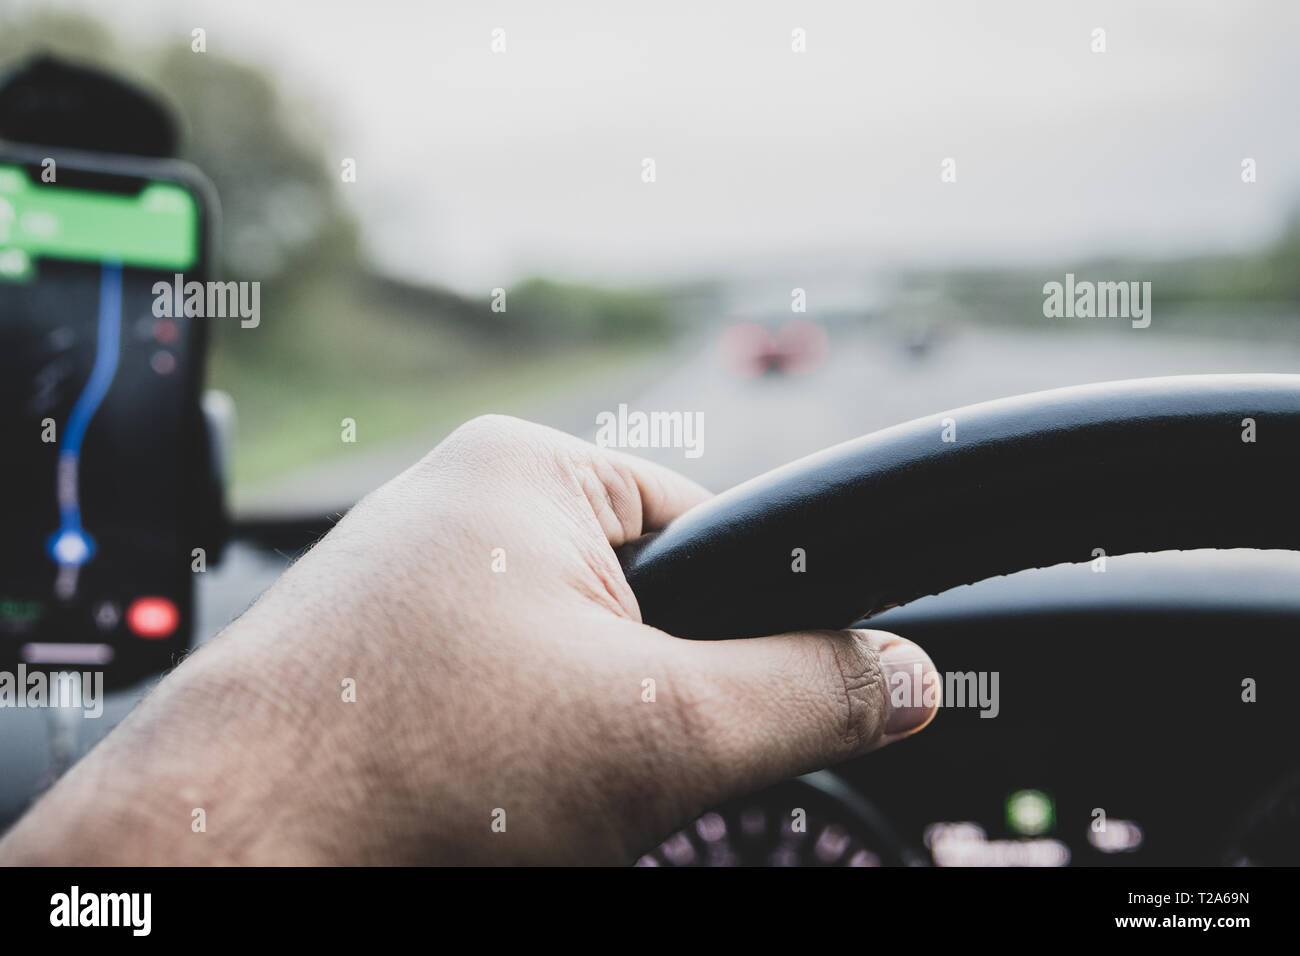 Google maps on a smart phone attached to holder on the windsceen of a car - seen by the driver - with a view of hands on steering wheel. Stock Photo